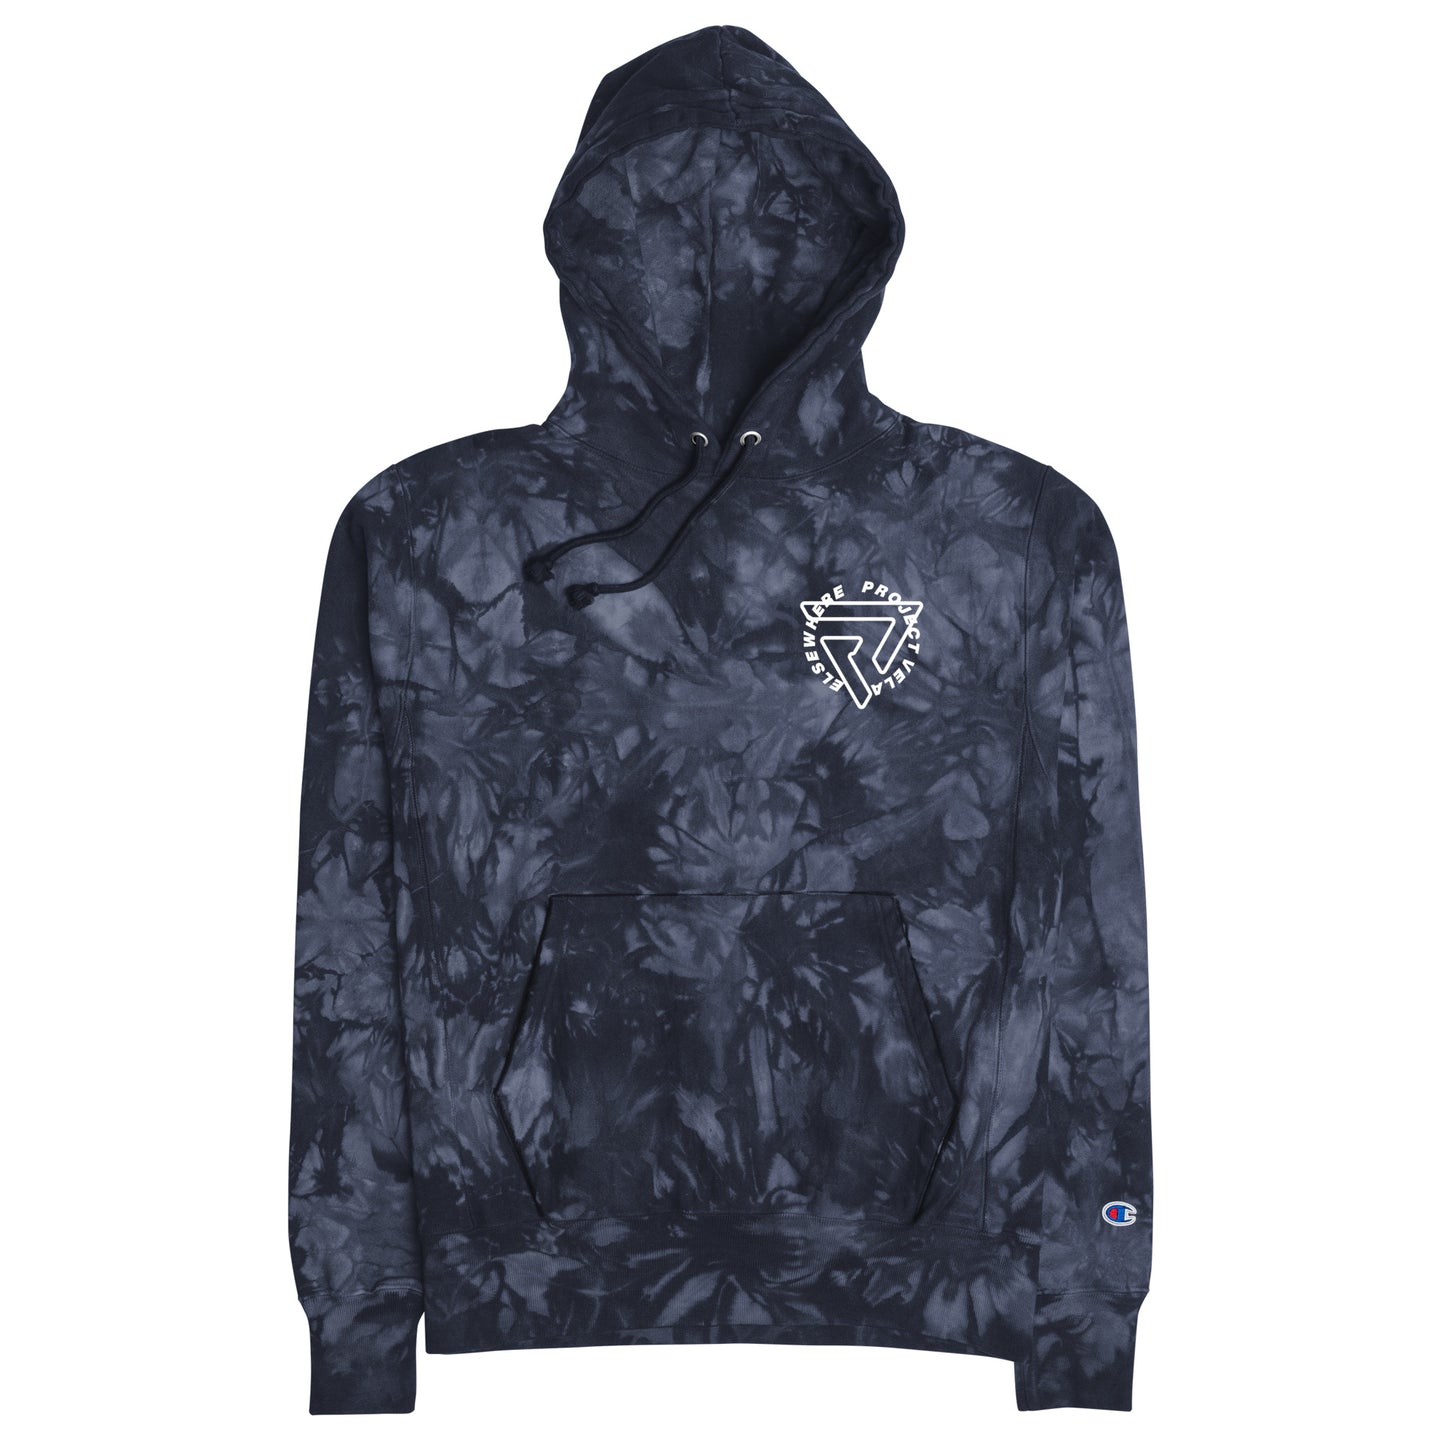 "Elsewhere Logo" Embroidered Unisex Champion tie-dye hoodie